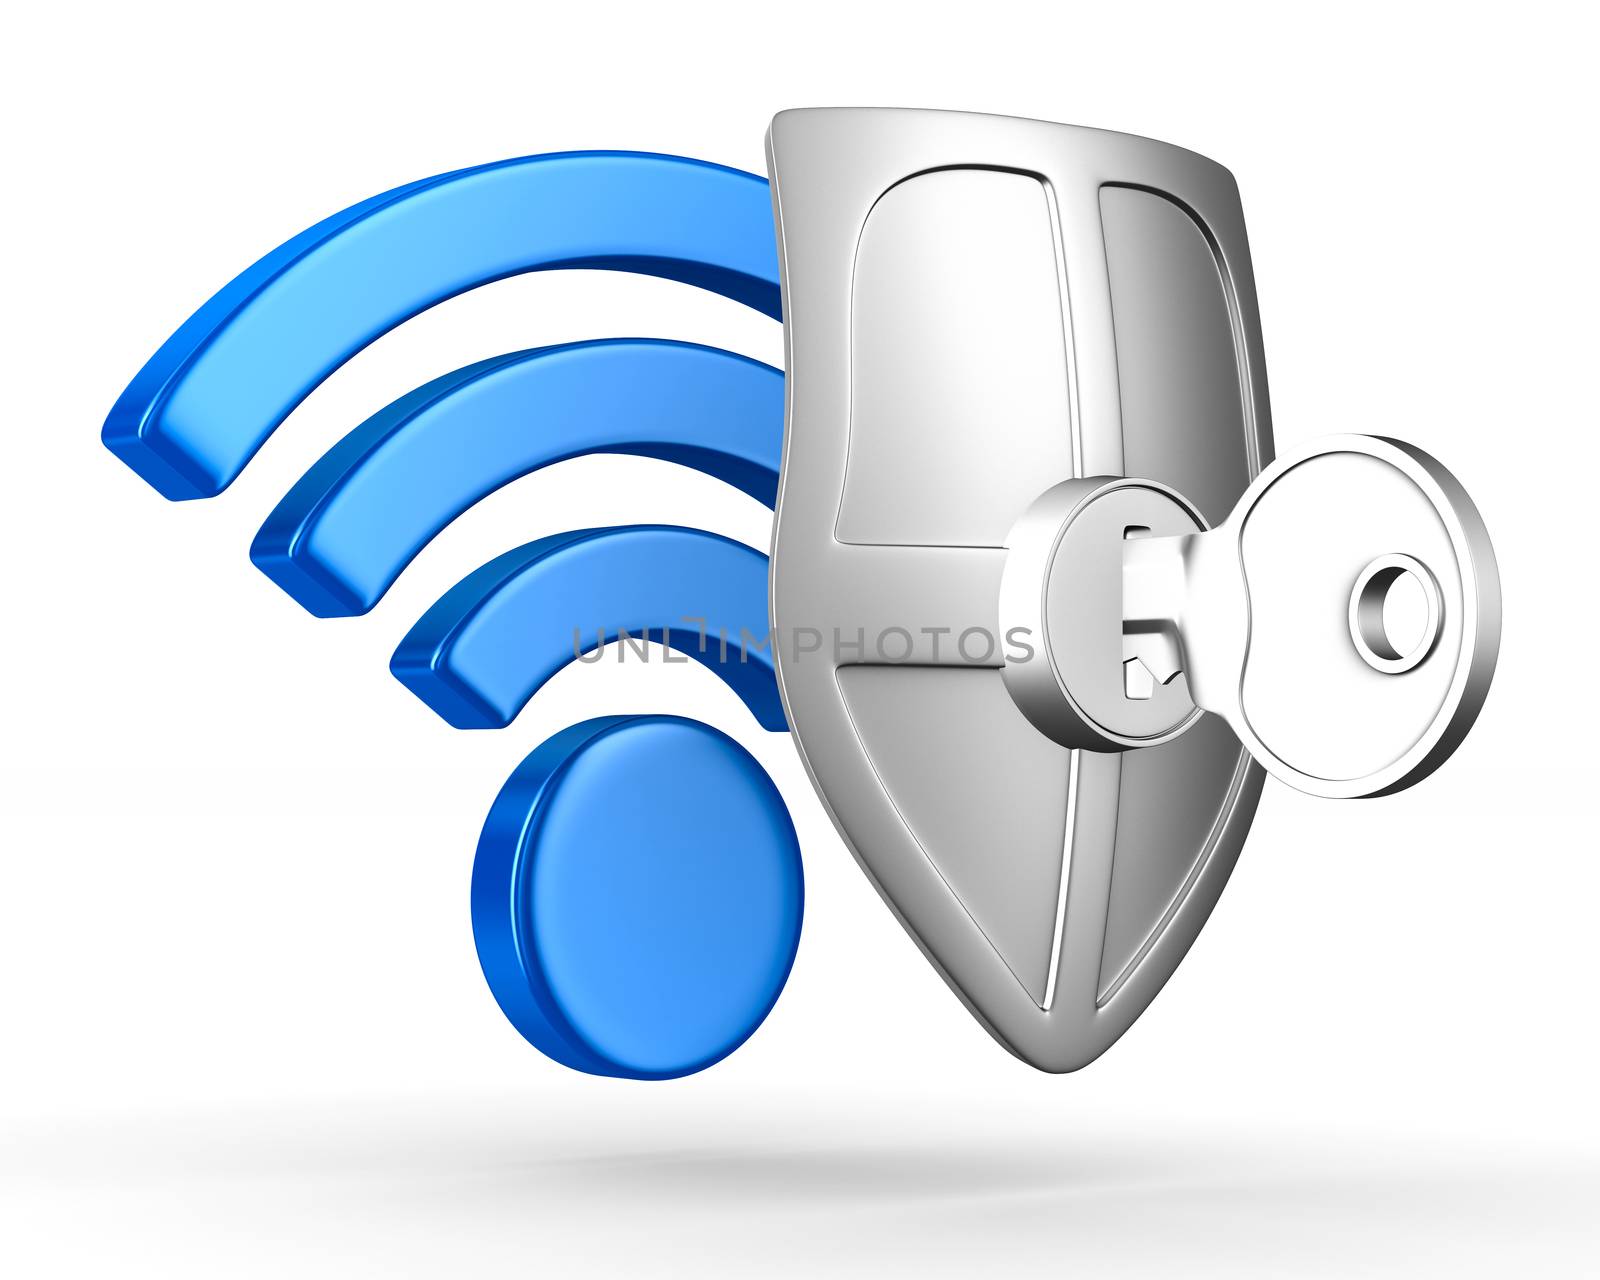 Sign wi-fi on white background. Isolated 3D image